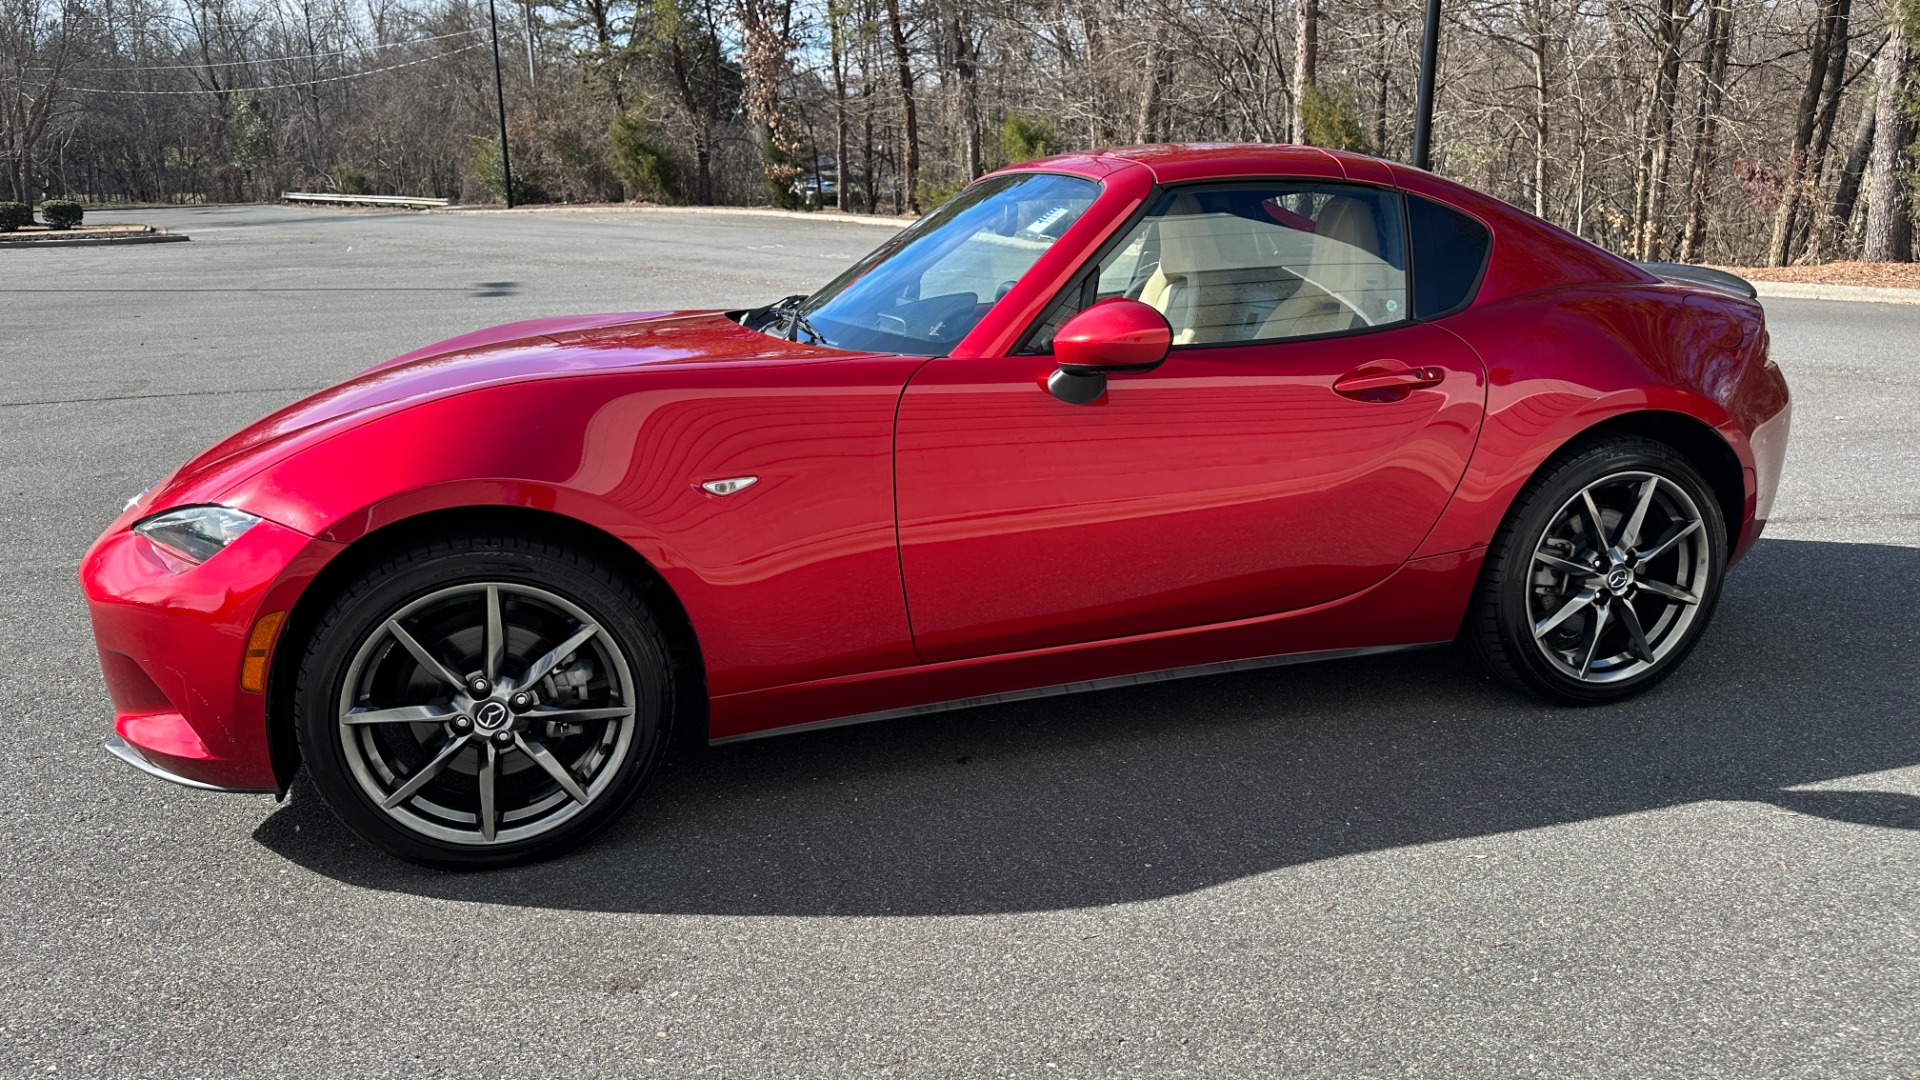 Used 2017 Mazda MX-5 Miata RF GRAND TOURING / POWER HARD TOP CONVERTIBLE / AUTOMATIC for sale $22,995 at Formula Imports in Charlotte NC 28227 7